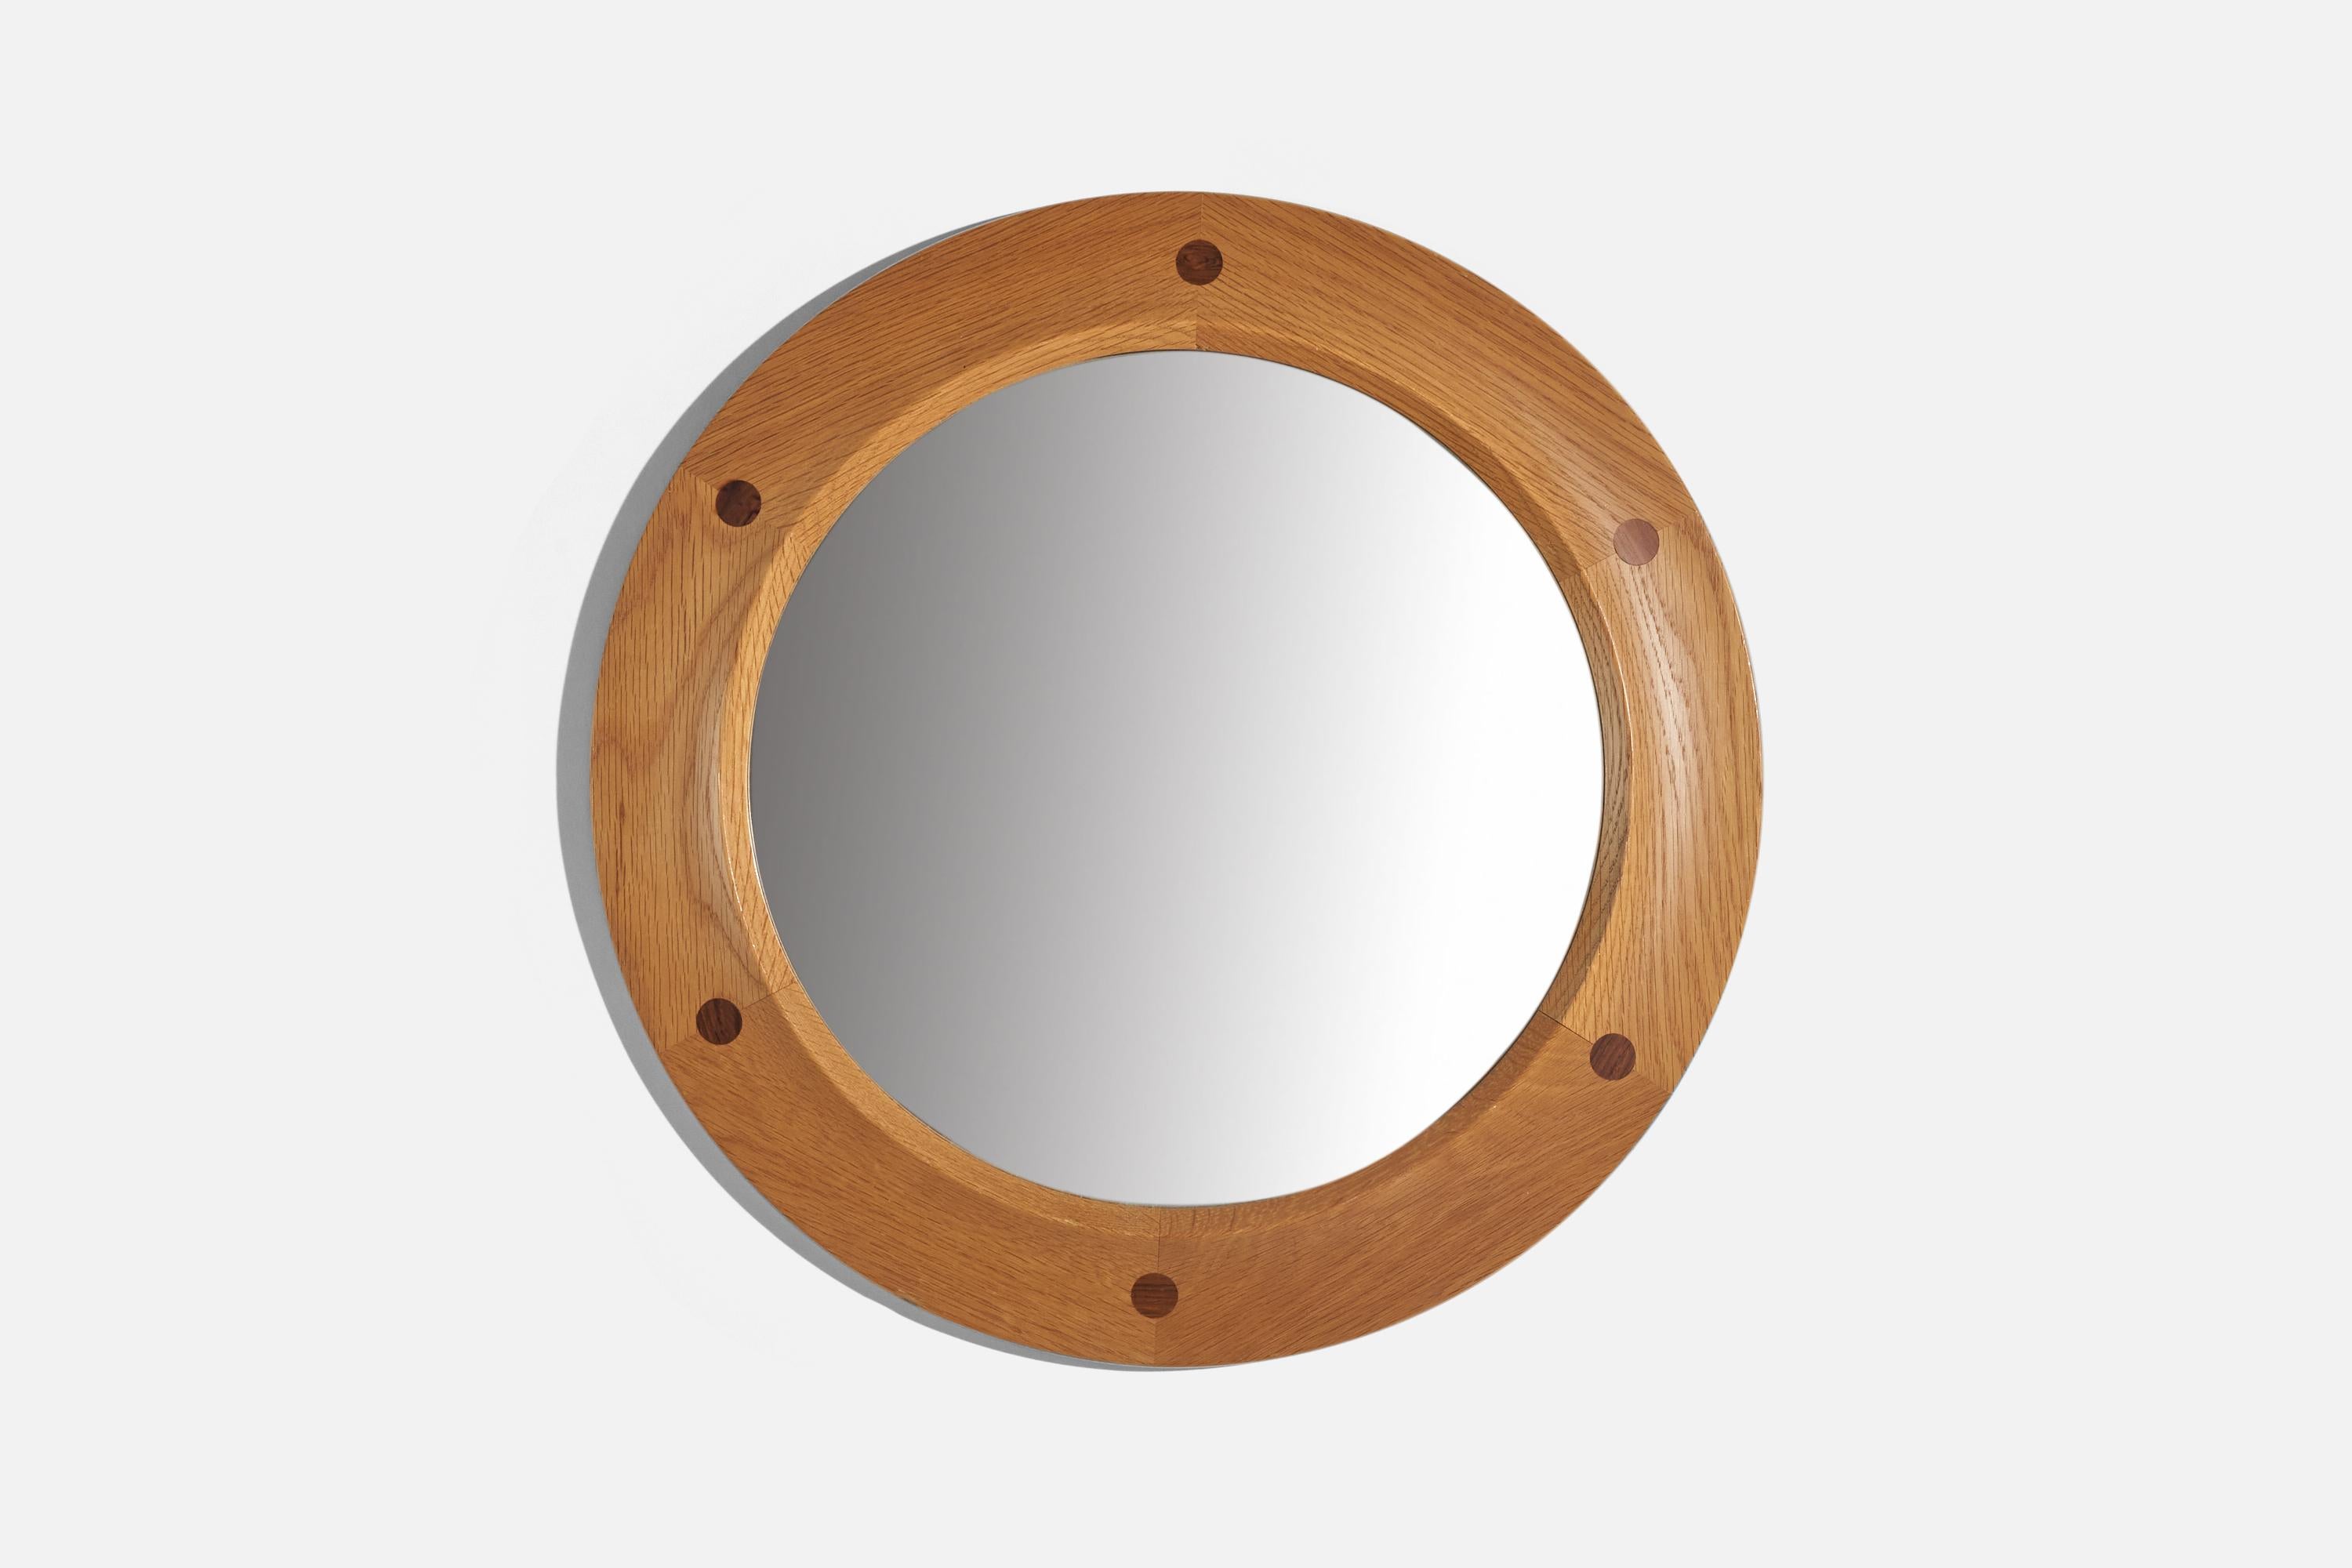 A stained oak and teak wall mirror designed and produced by Fröseke, AB Nybrofabriken, Sweden, 1950s.